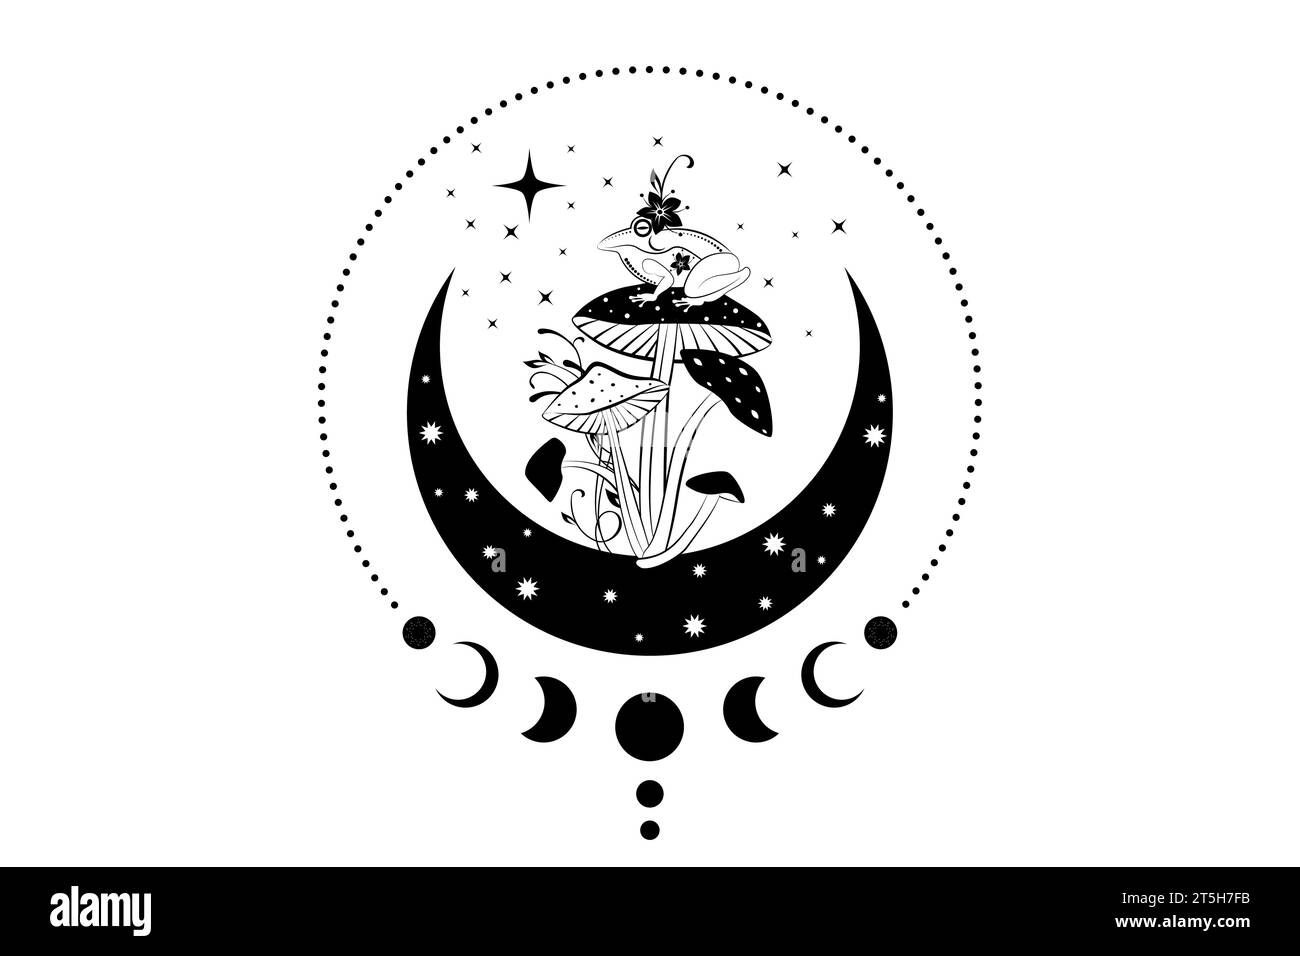 Spiritual sacred frog over magic mushroom in witchcraft crescent moon. Mystical celestial toad with moon phases and stars. Witchy esoteric fungus logo Stock Vector